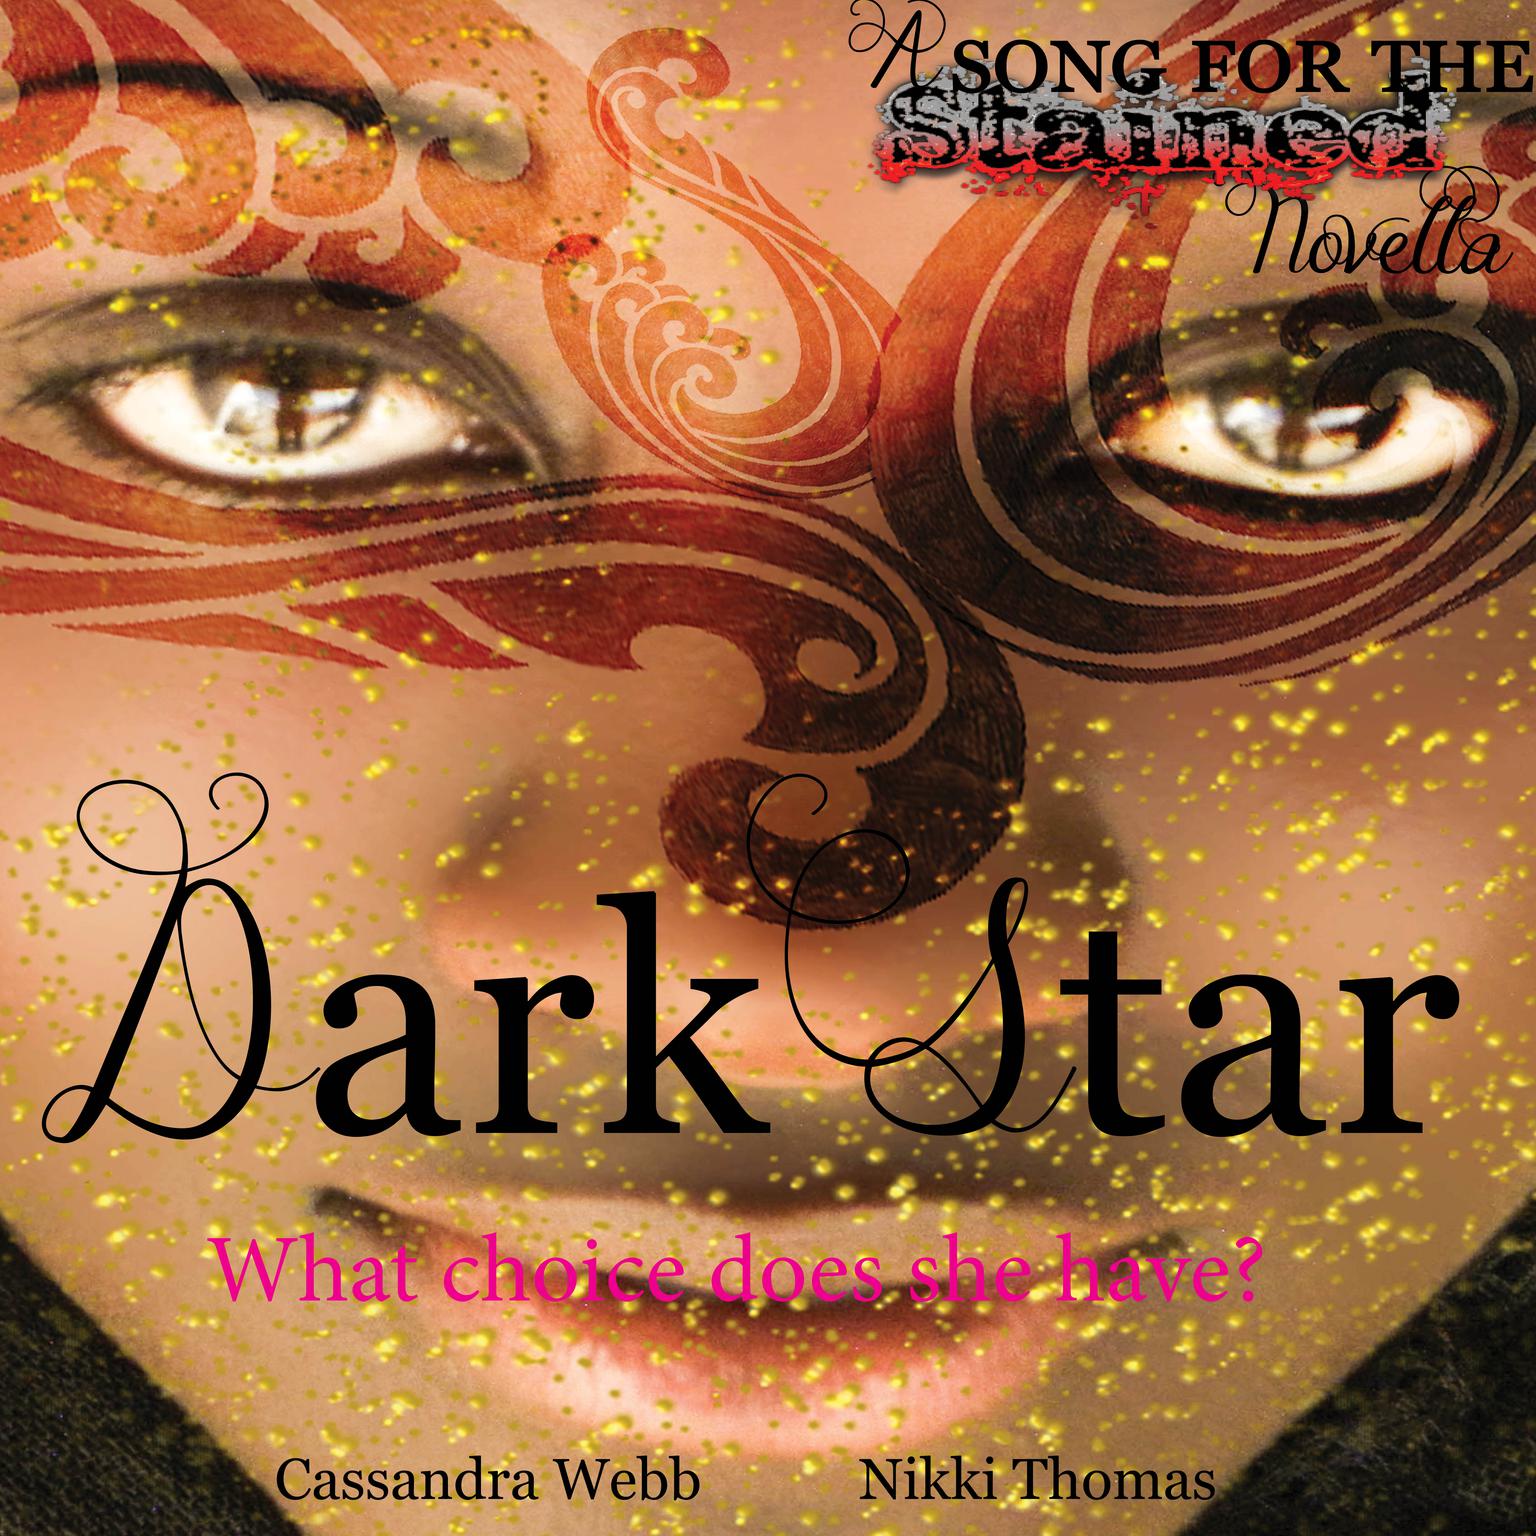 Dark Star: A Song for the Stained Novella Audiobook, by Cassandra Webb